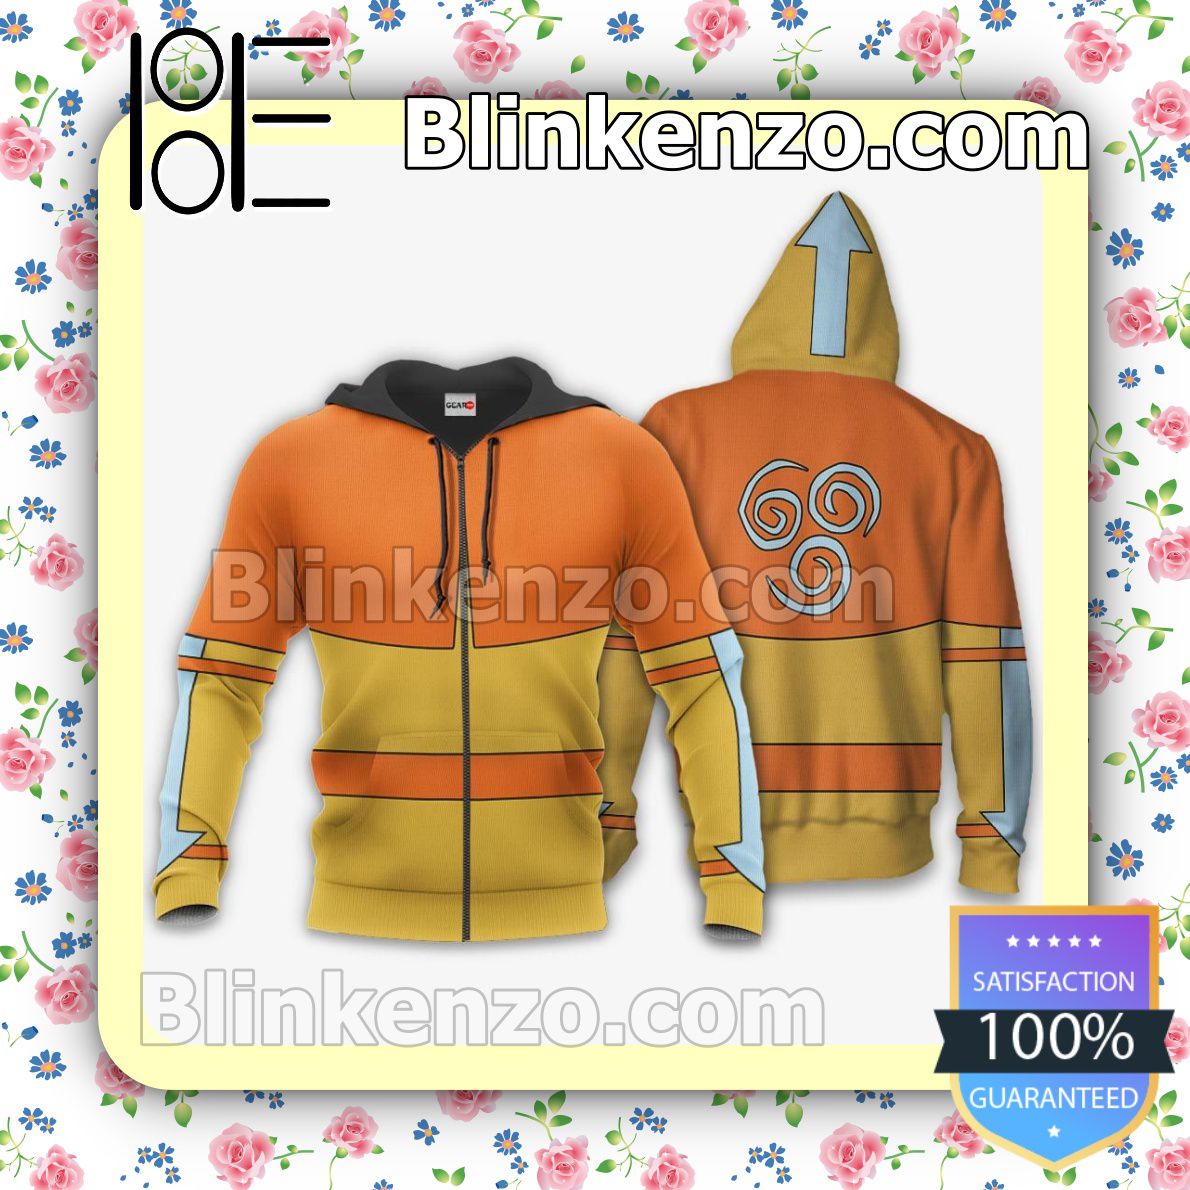 Avatar The Last Airbender Aang Uniform Anime Costume Personalized T-shirt, Hoodie, Long Sleeve, Bomber Jacket